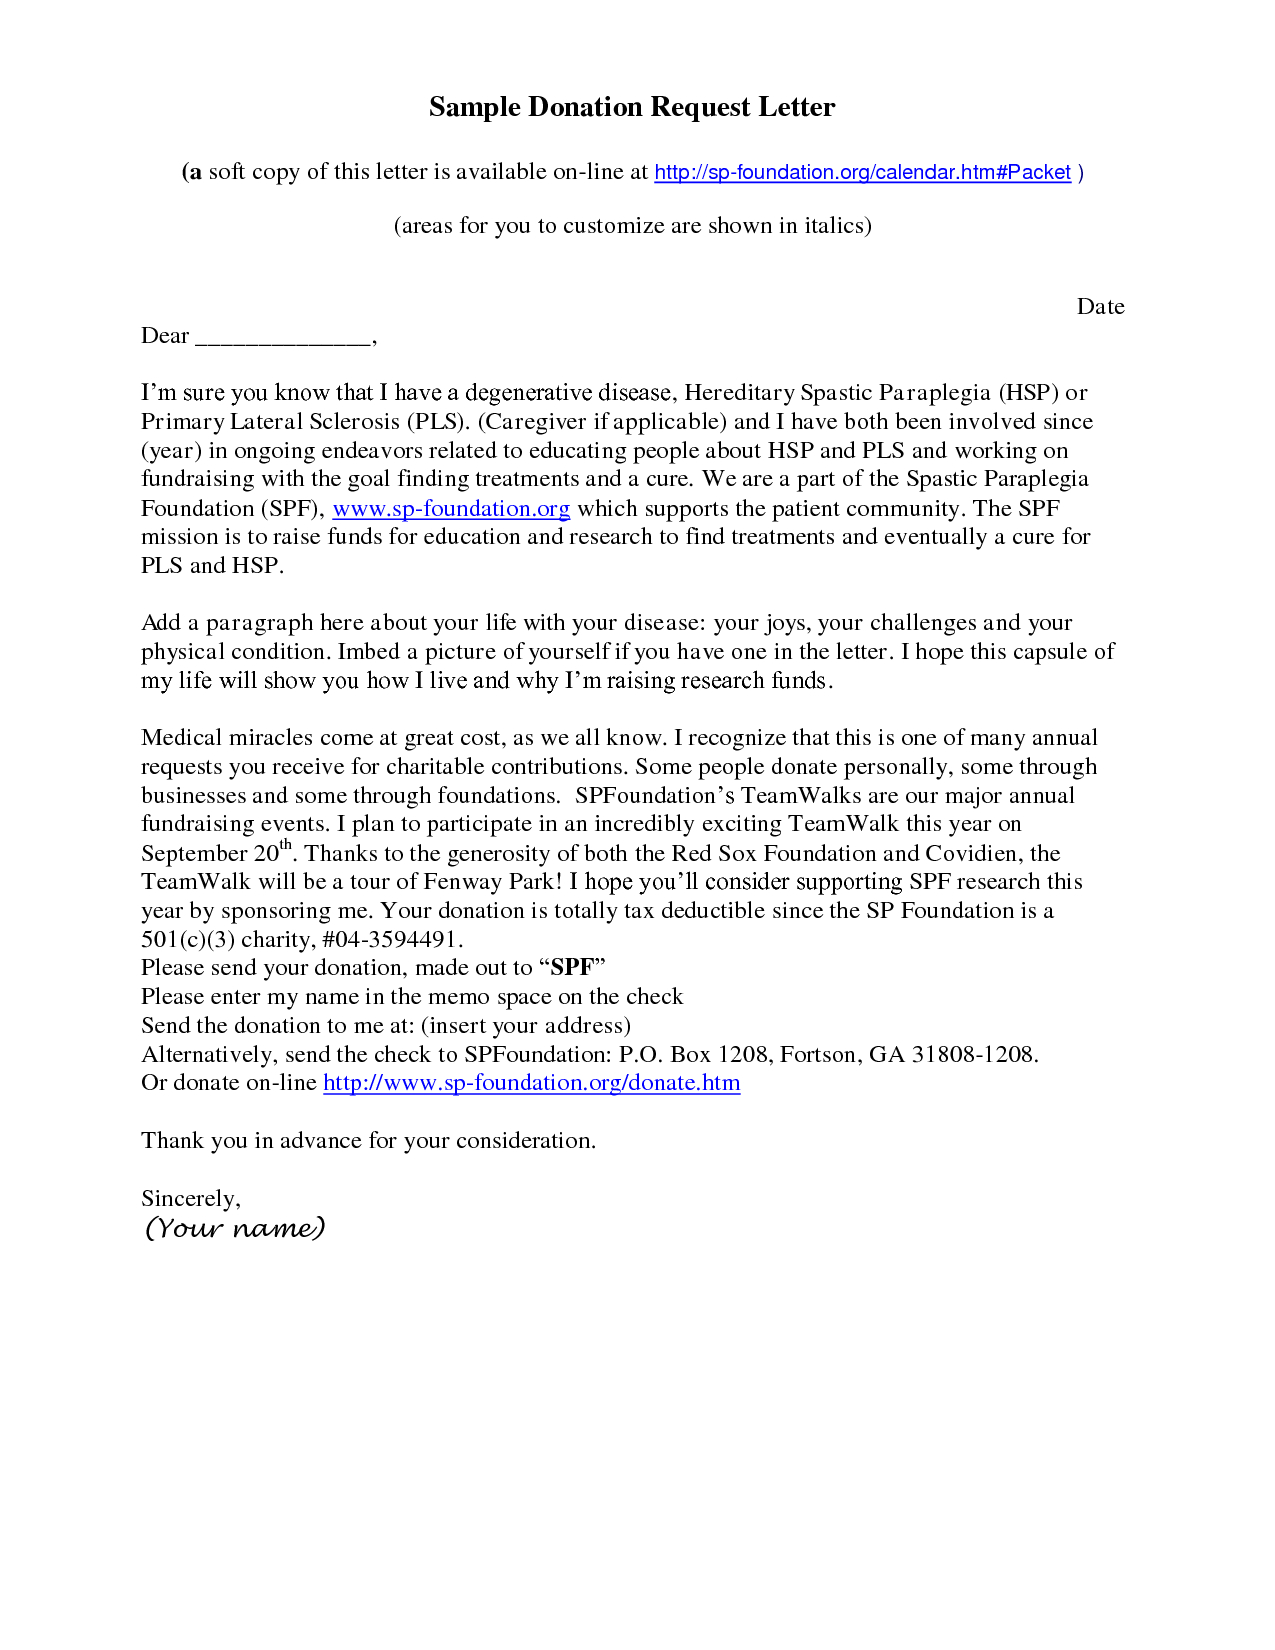 Fundraiser Request Letter Template - How to Write A solicitation Letter for Donations Choice Image